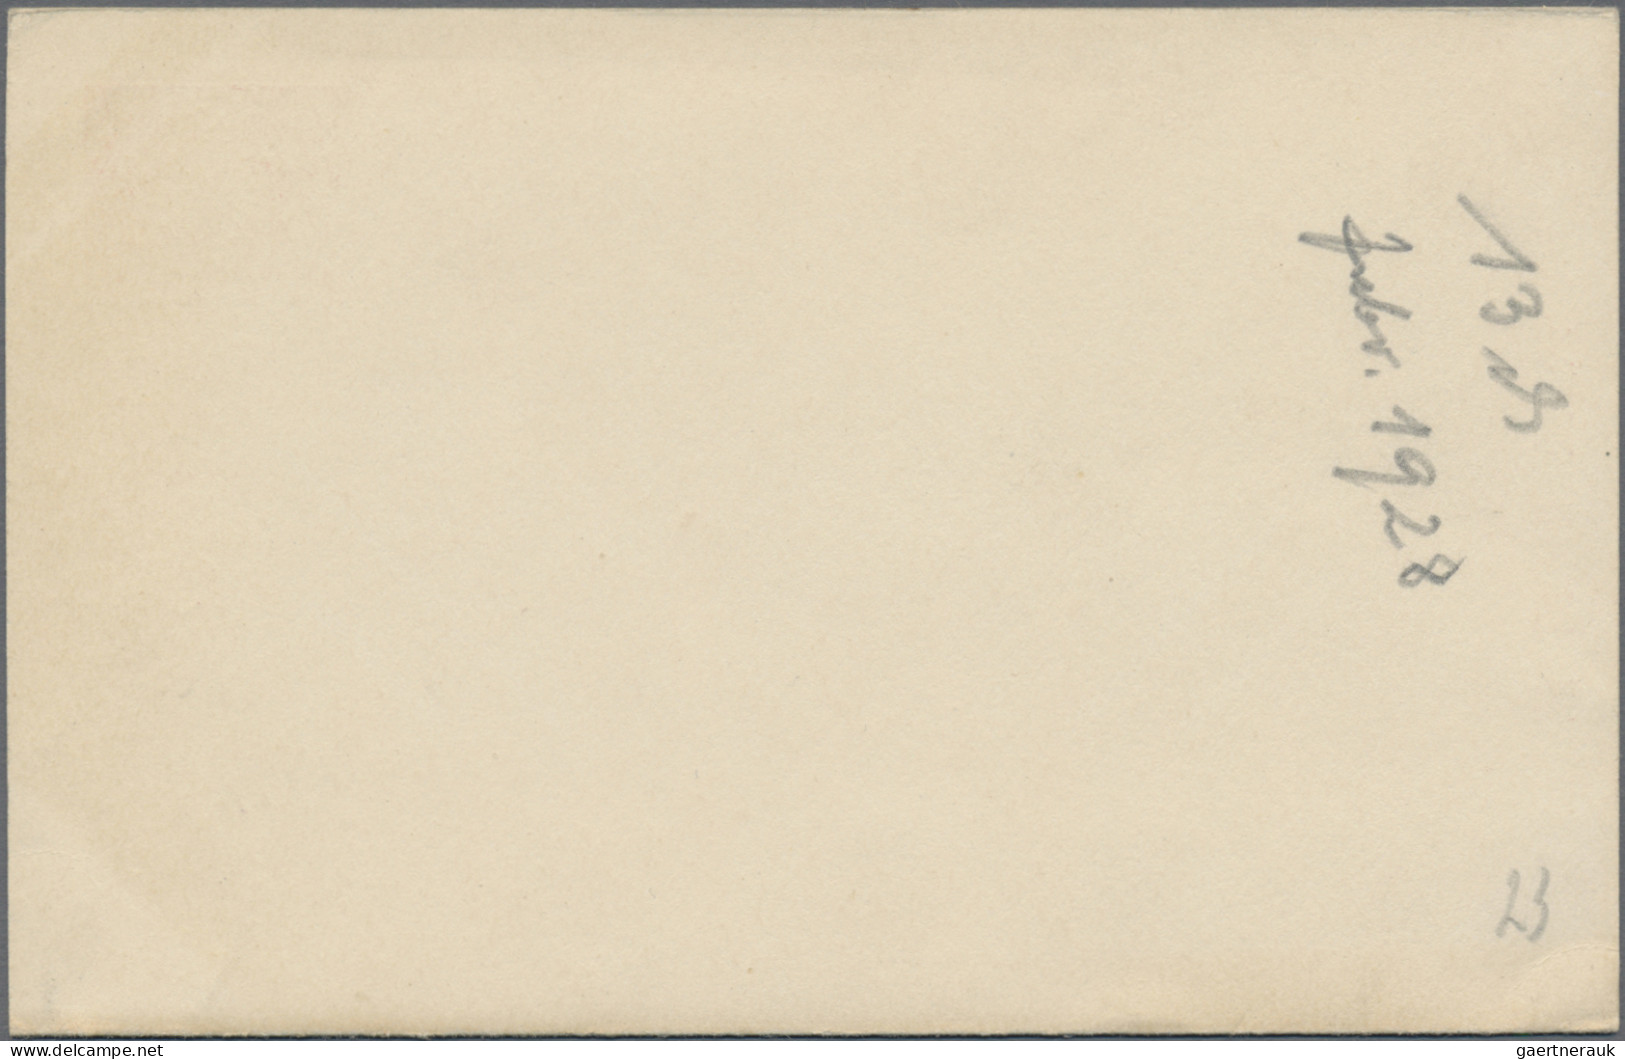 Japanese Post In China: 1926, Kuantung District Stationery: Card 2 S. Green, Dou - 1943-45 Shanghai & Nankin